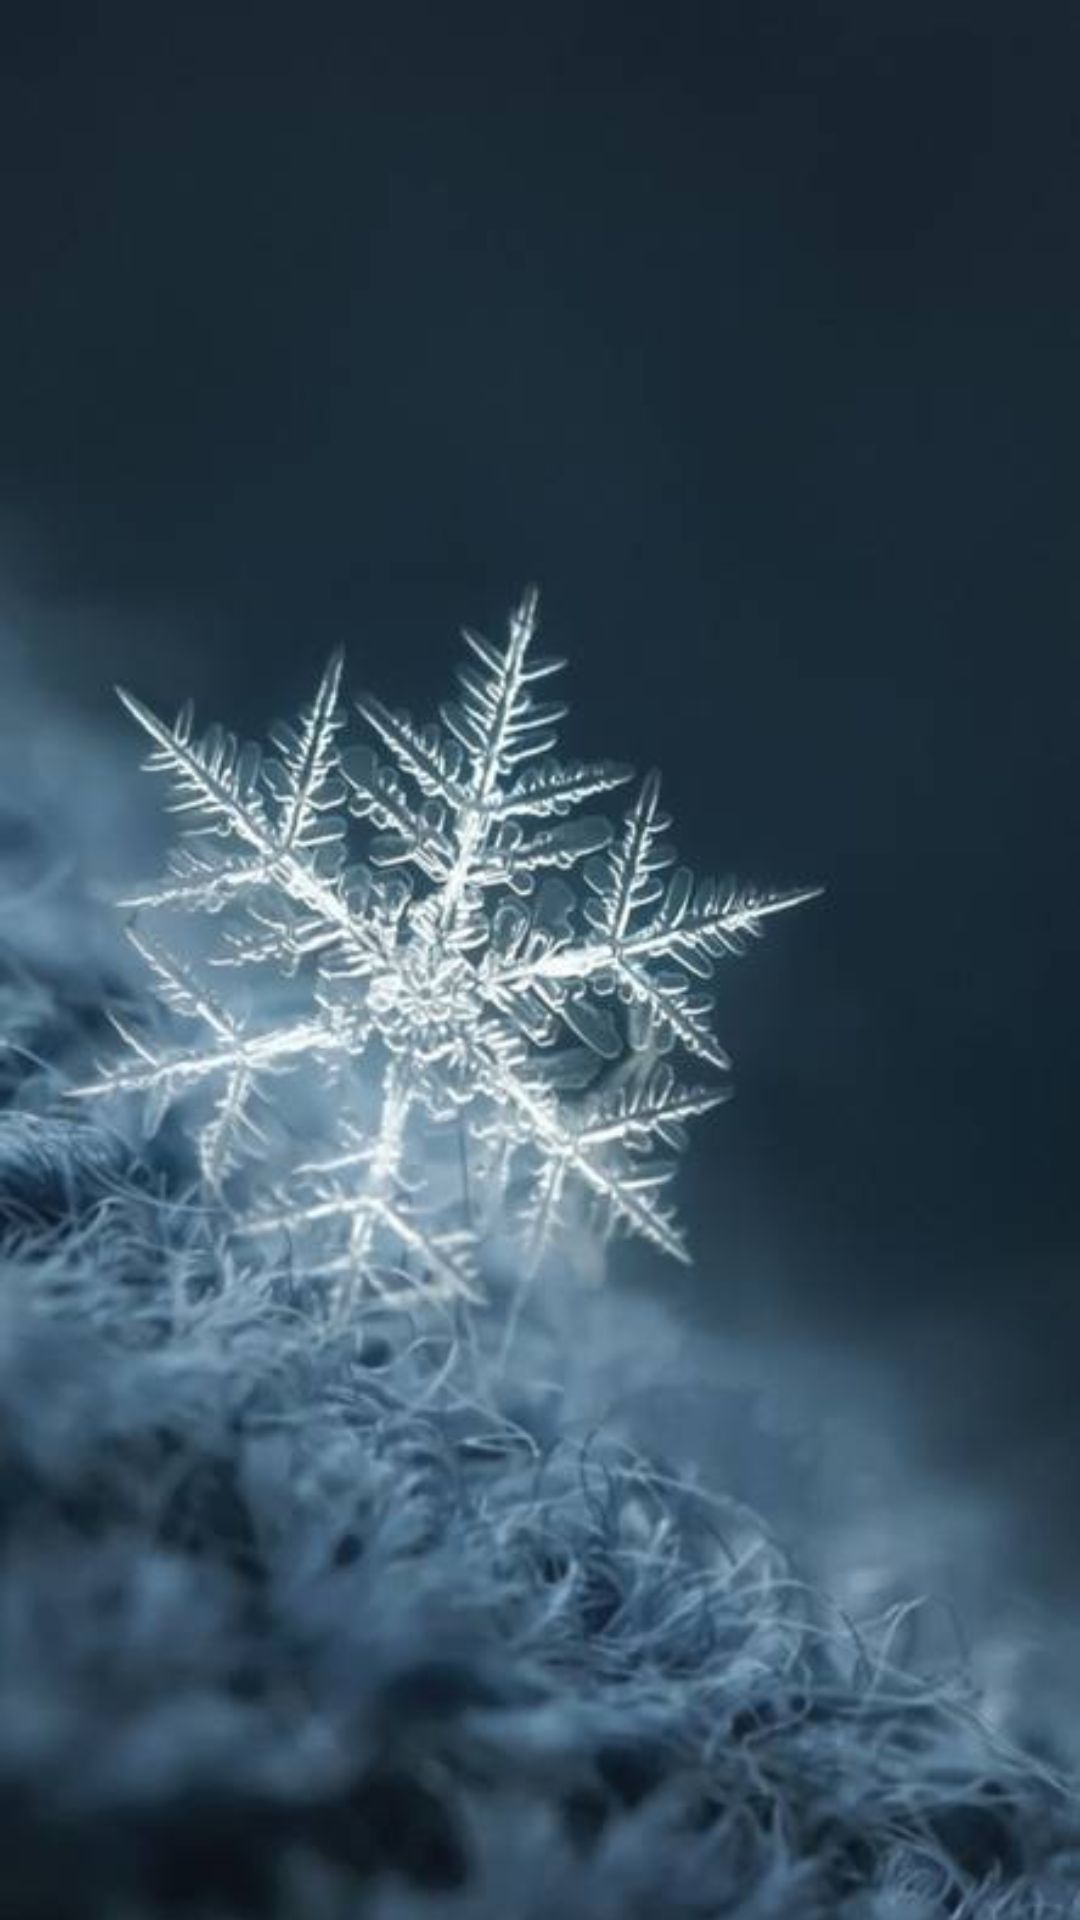 Snowflake Wallpapers - Top 25 Best Snowflake Backgrounds Download